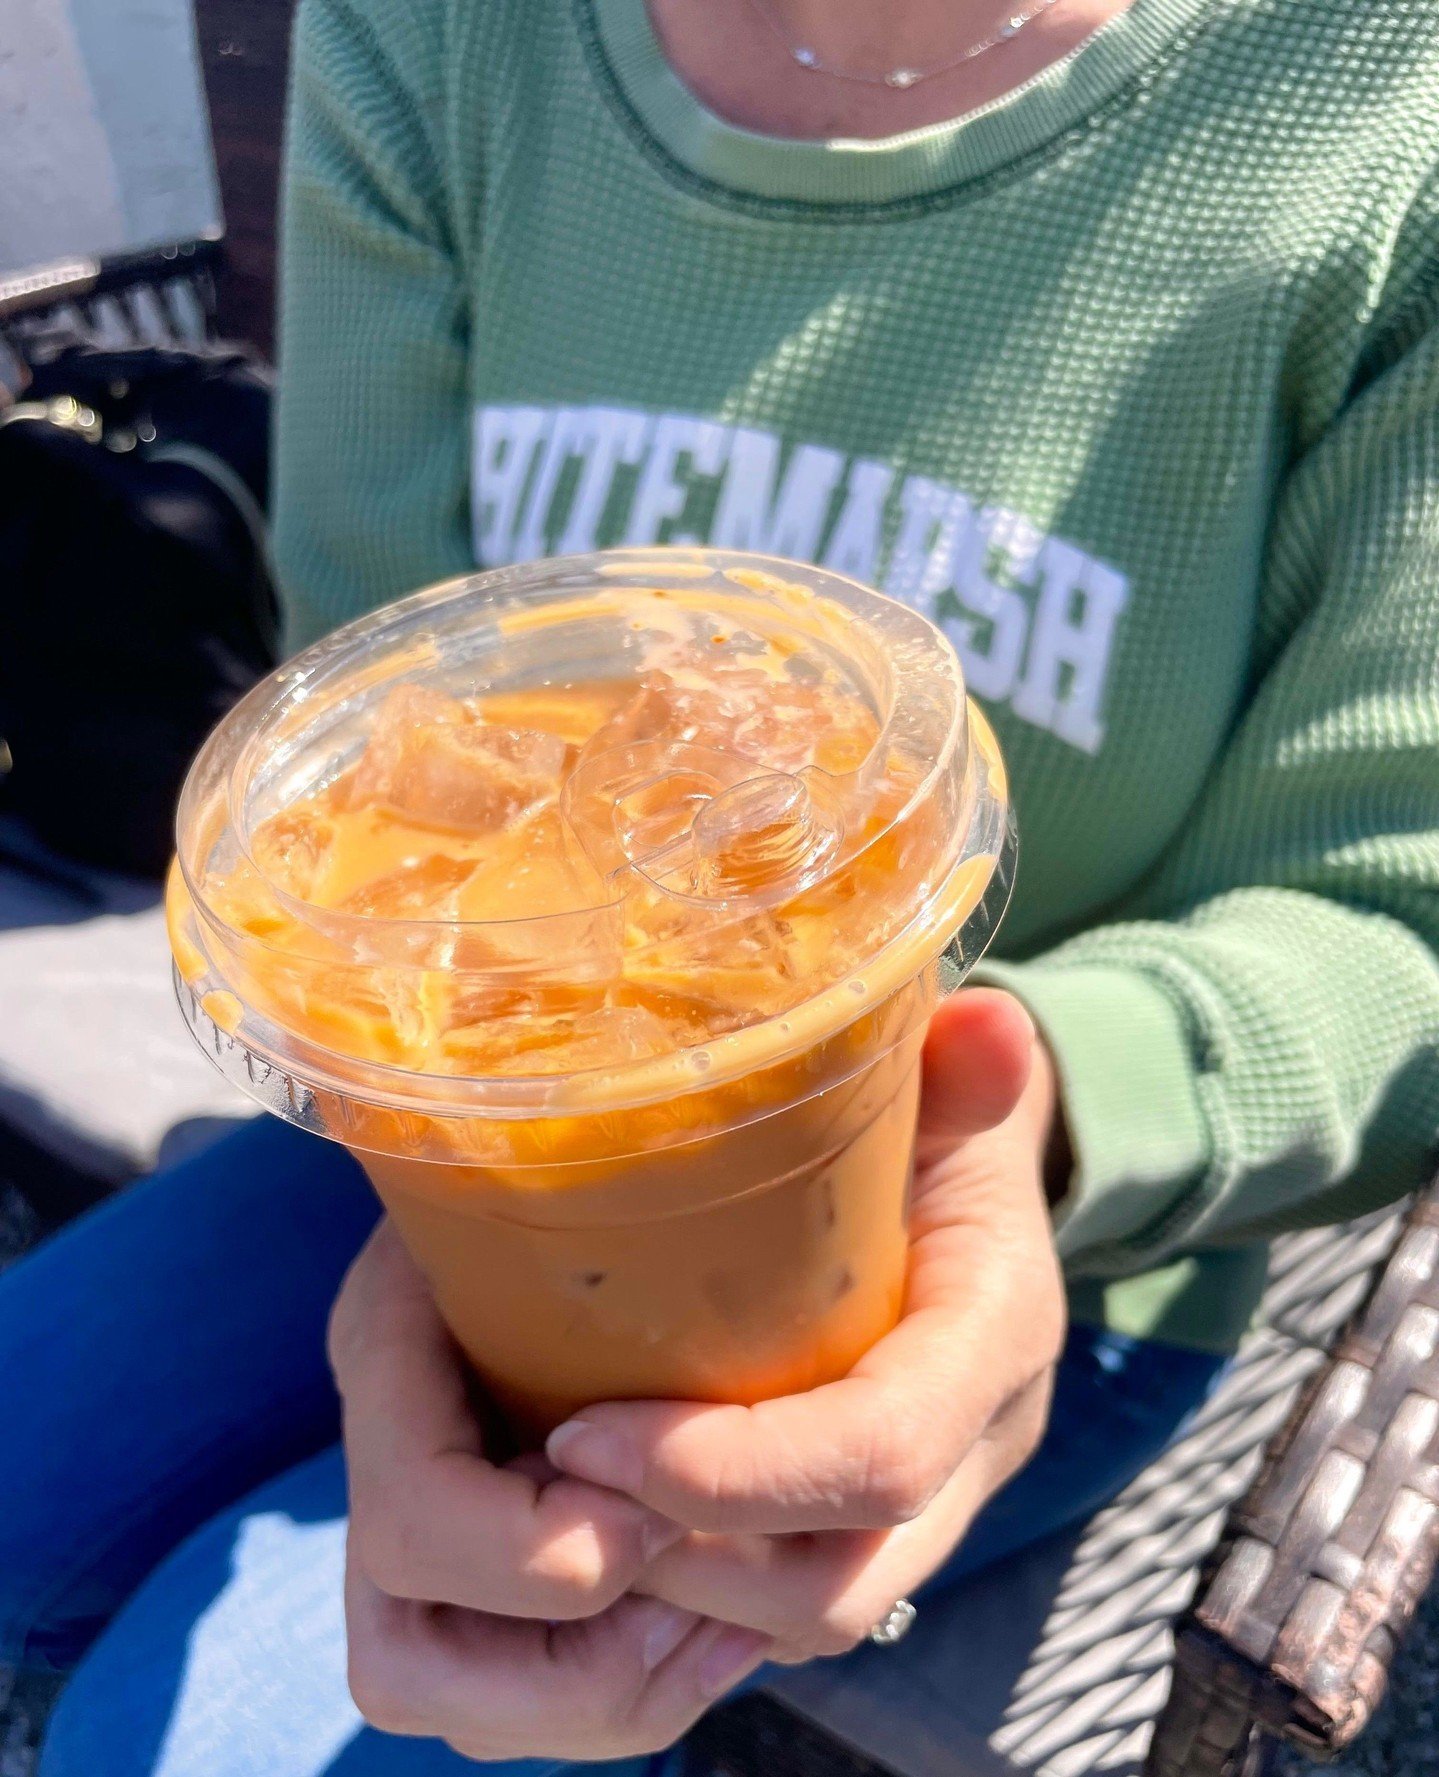 Did you know we sell Thai tea lattes?!? For all of our Chai fans, try this amazing alternative for the perfect spring drink!⁠
⁠
#drinkfeine #thaitealatte #thaitea #latte #coffeeshop #coffeelovers